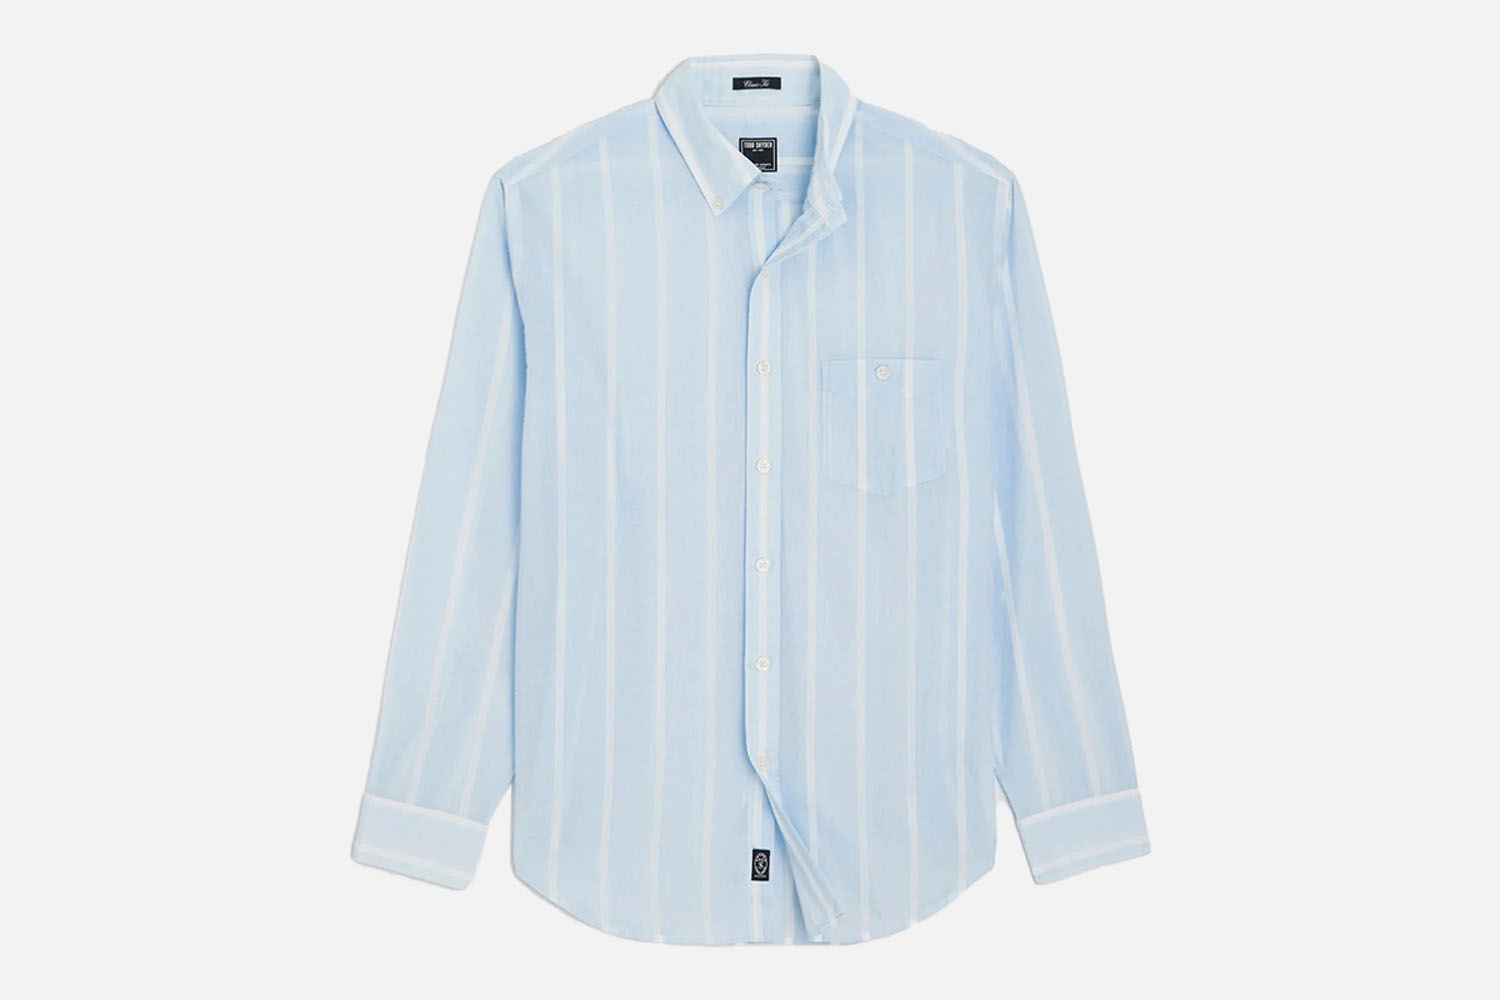 The Summerweight Button-Down: Todd Snyder Classic Fit Summerweight Favorite Shirt